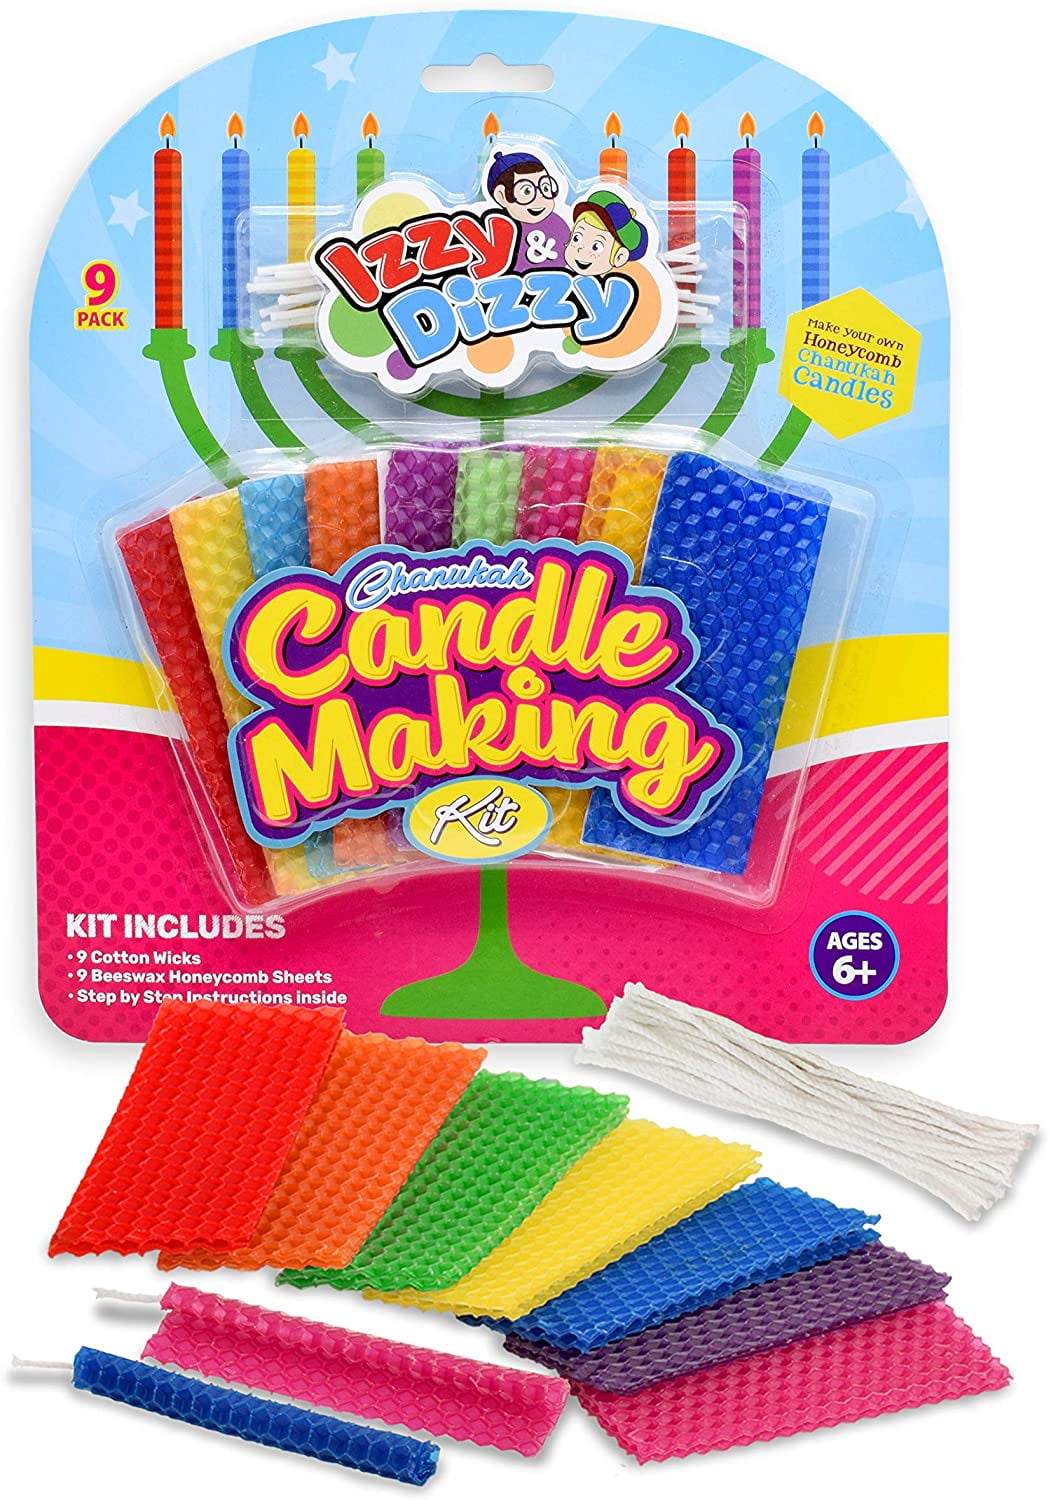 Izzy 'n' Dizzy Hanukkah Candle Making Kit - Includes 9 Beeswax Honeycomb Sheets, 9 Cotton Wicks